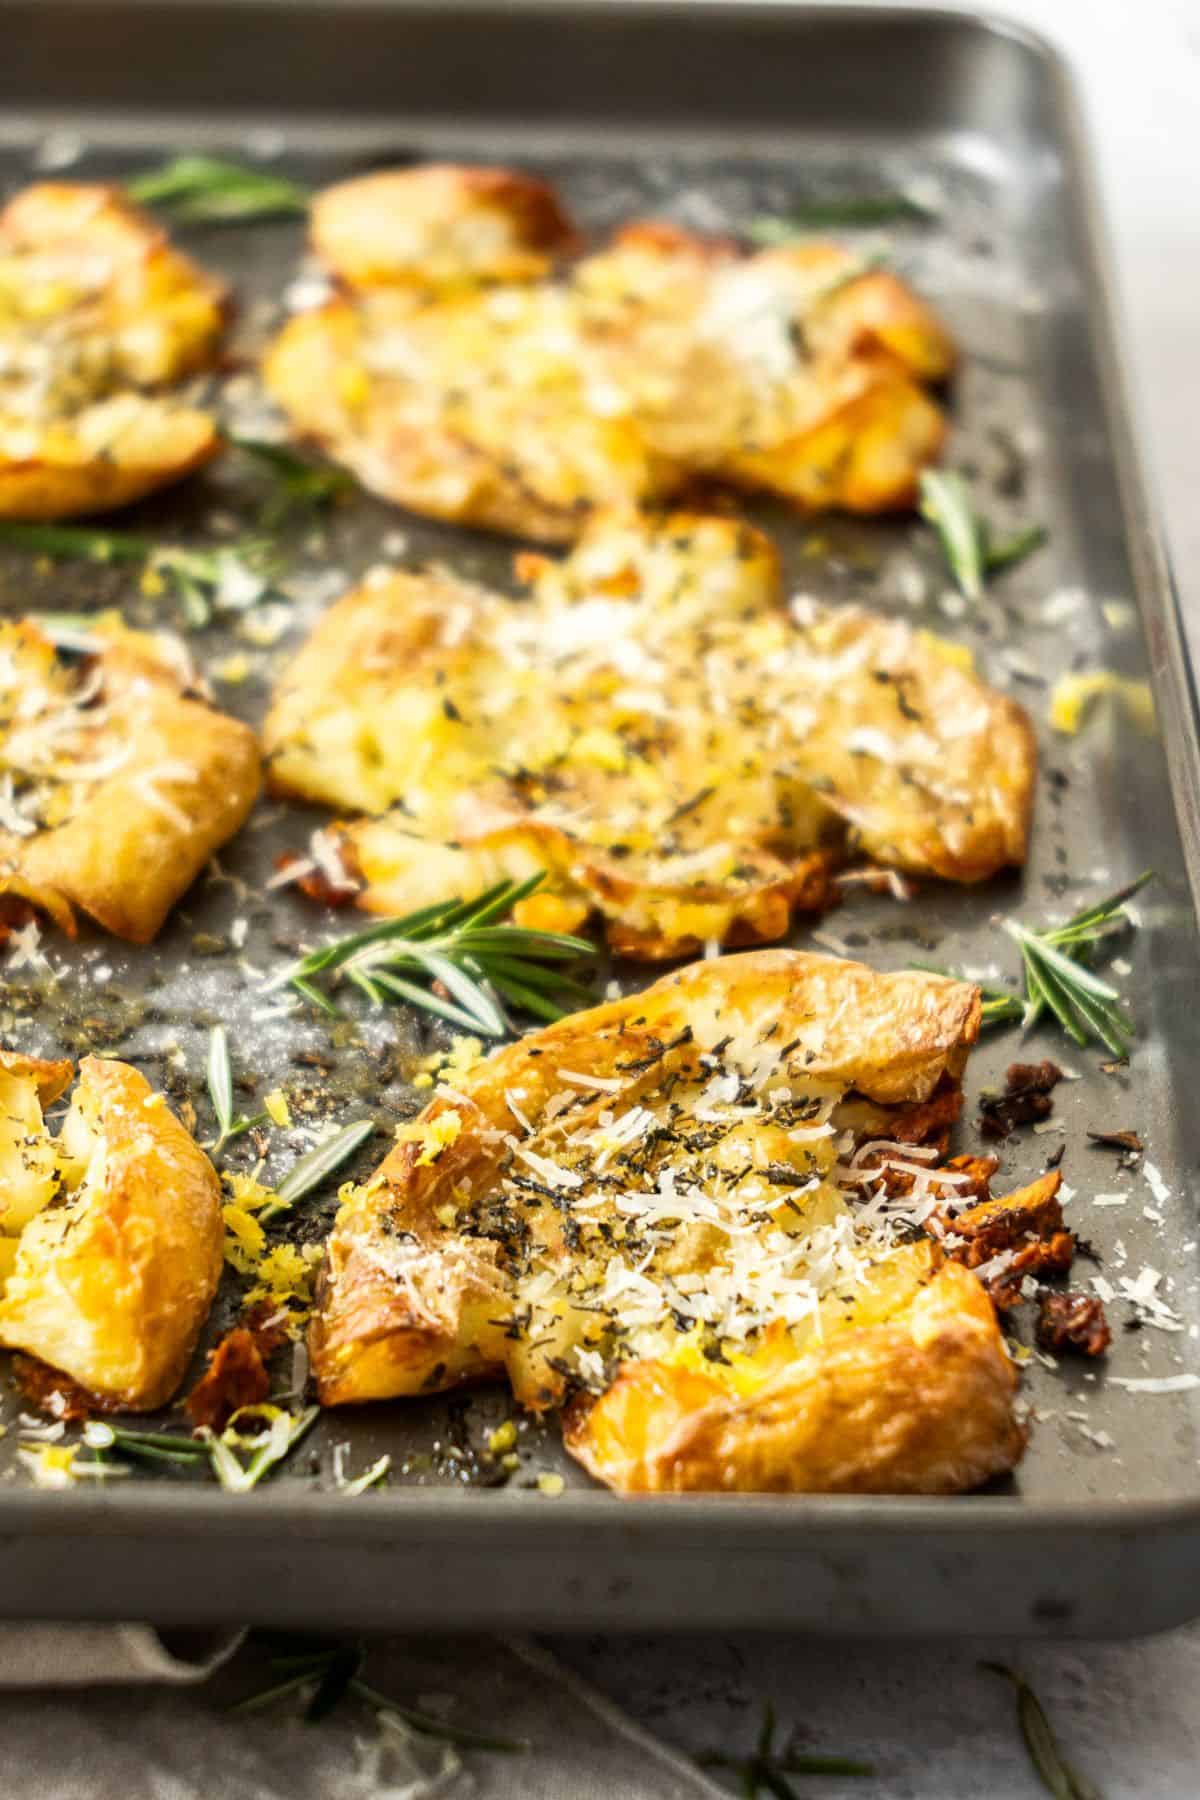 Sheetpan with six roasted Smashed Potatoes, garnished with rosemary, grated Parmesan and lemon zest.